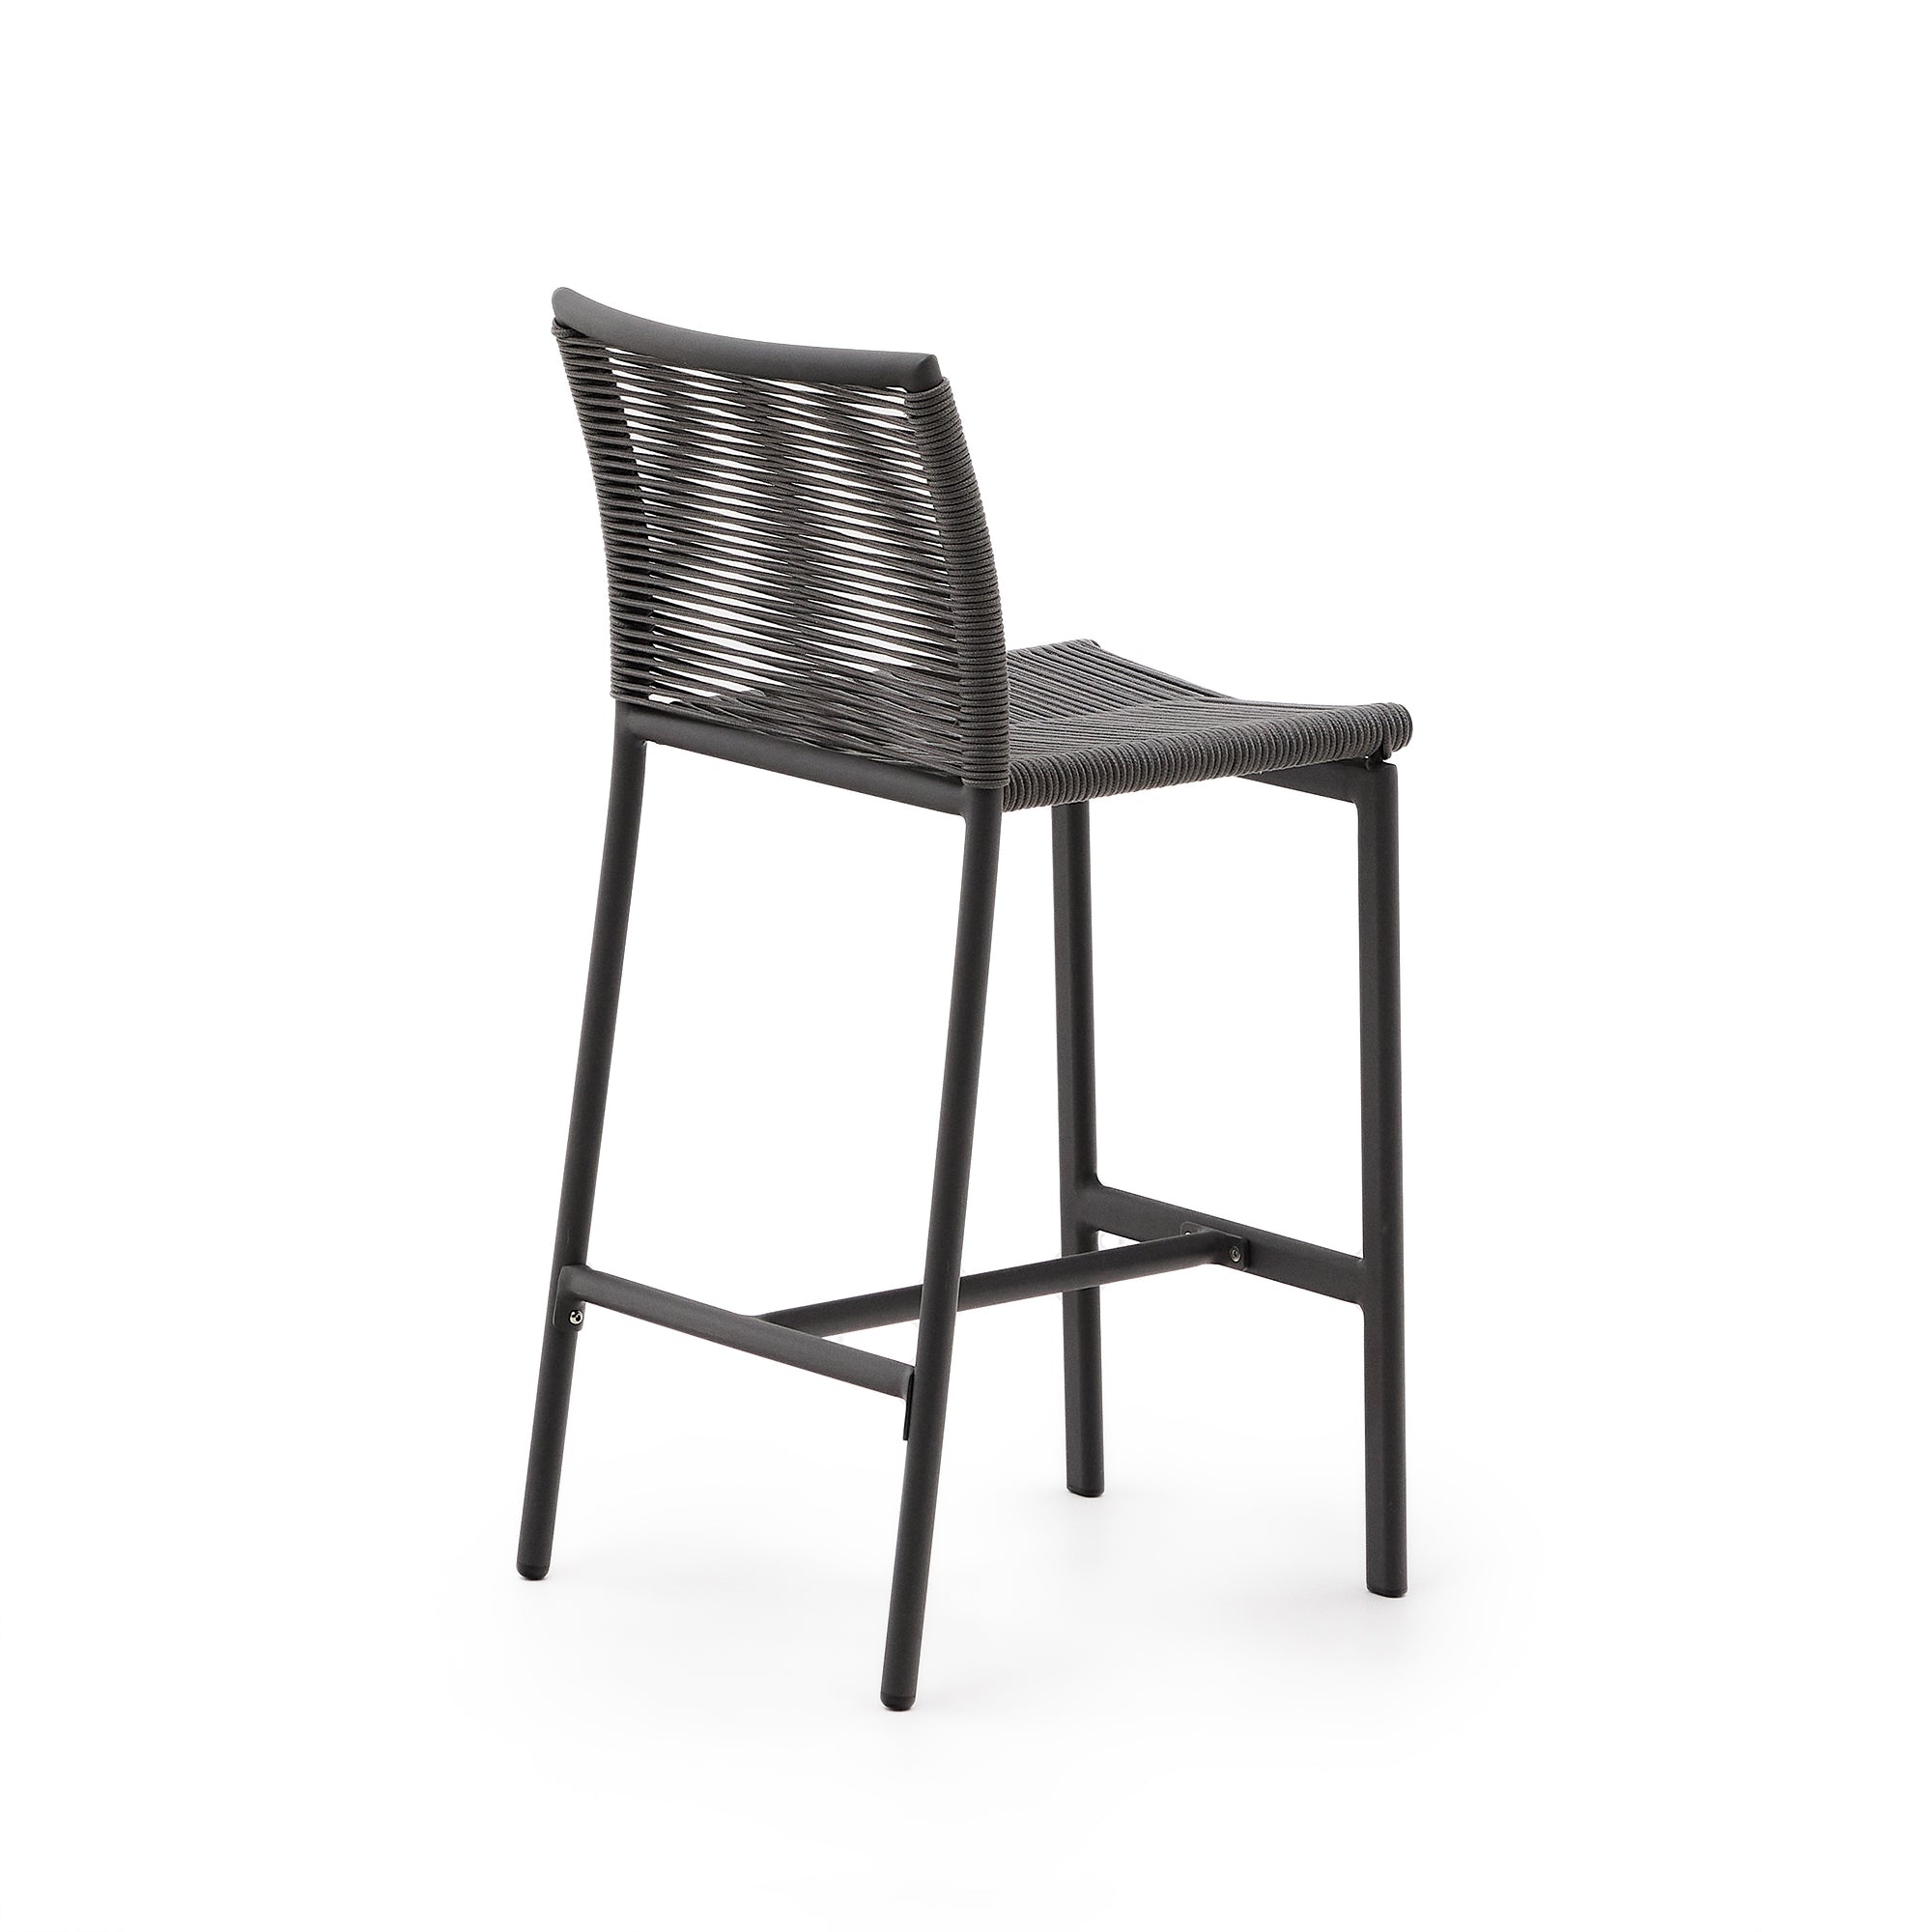 Culip outdoor chair made of rope and gray aluminum, 65 cm